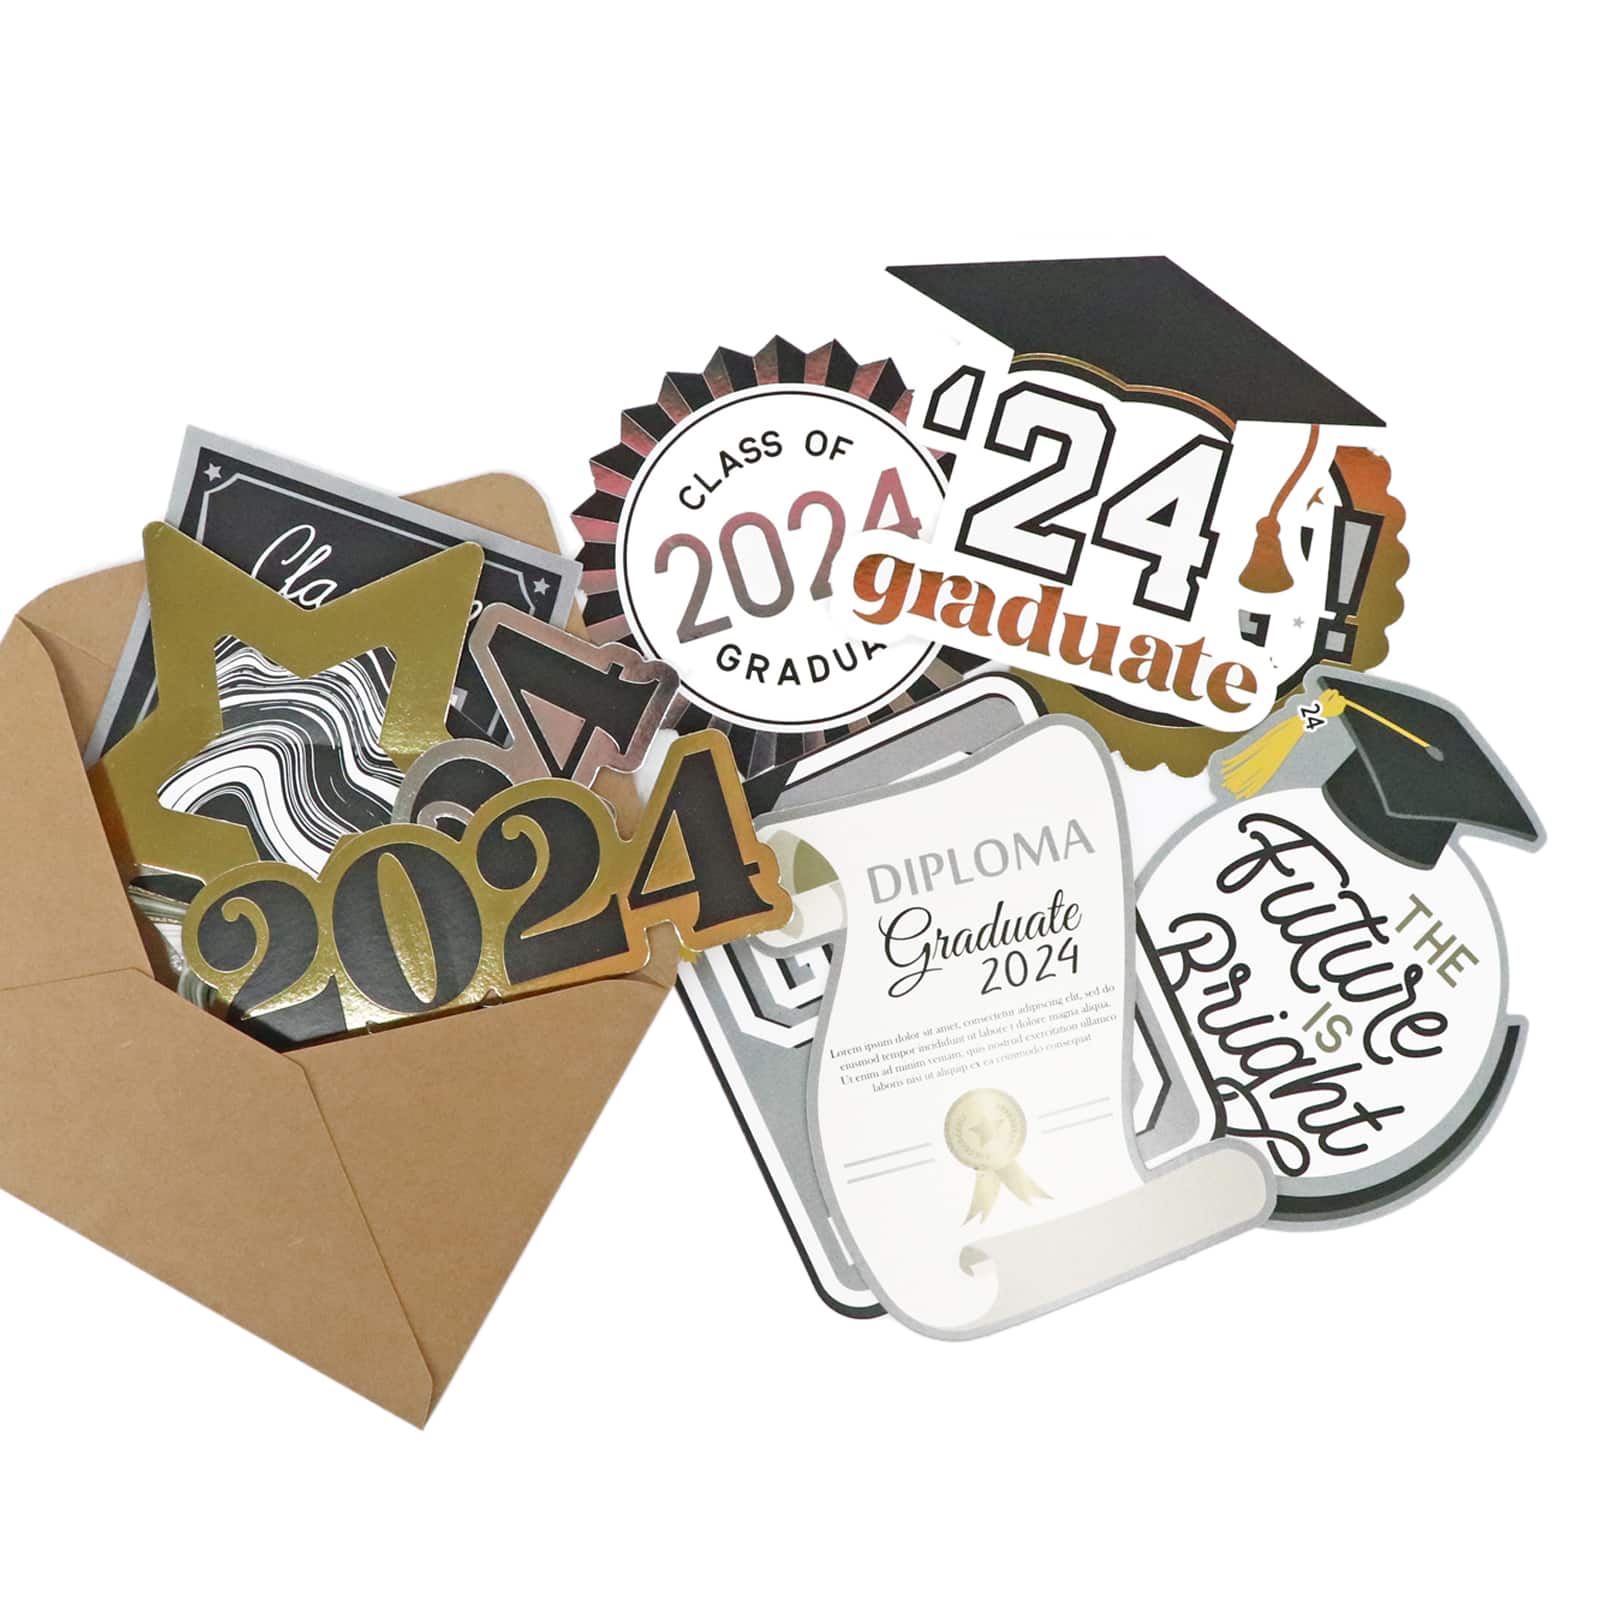 Graduation Class of 2024 Die Cut Stickers by Recollections&#x2122;